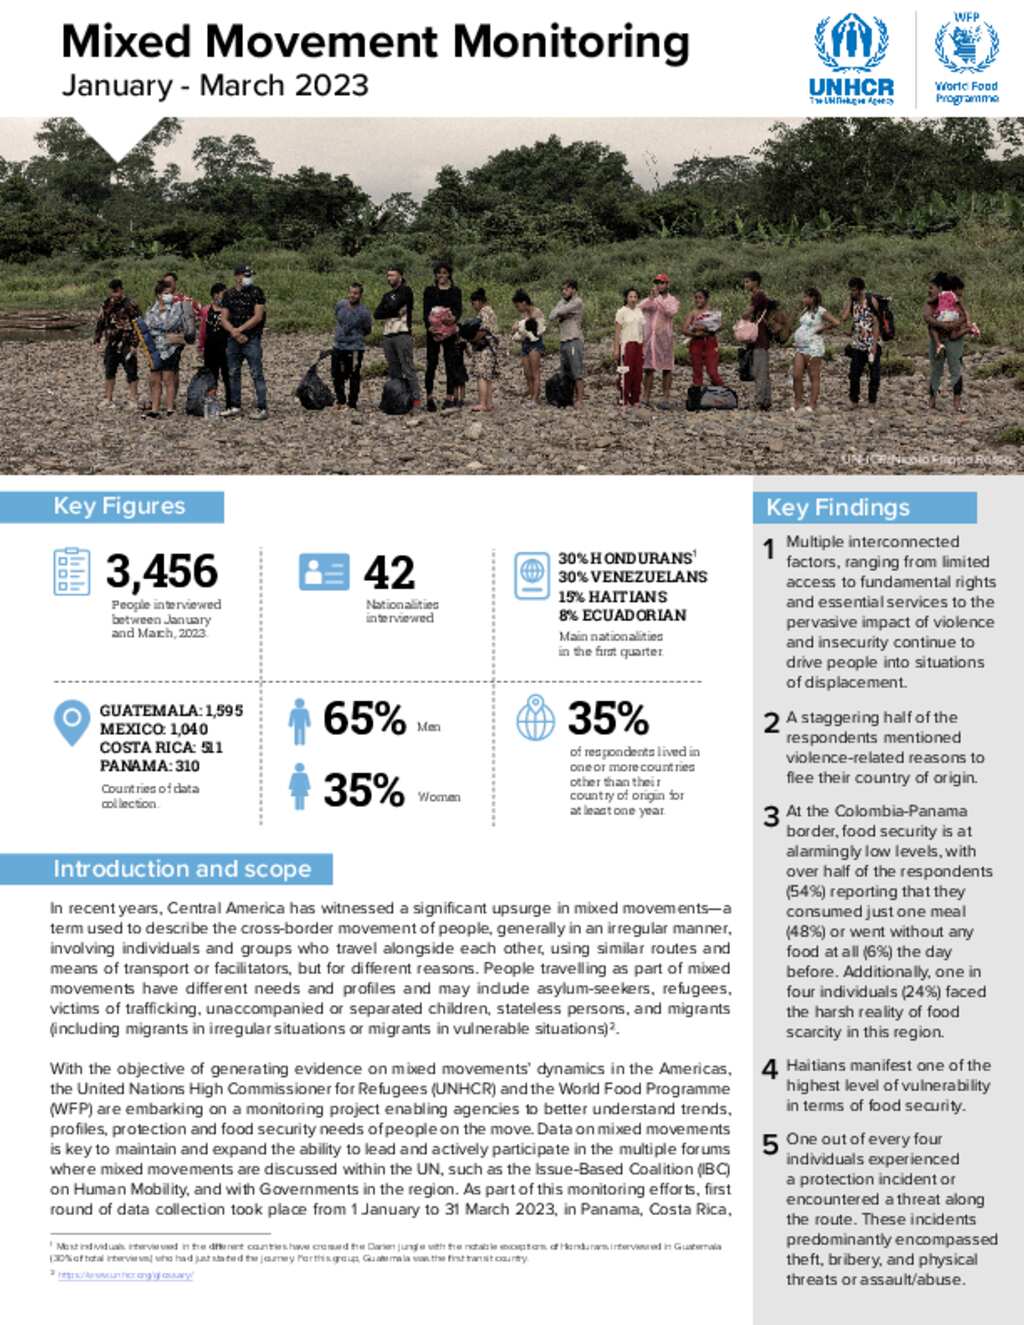 Document - Mixed Movement Monitoring Report | UNHCR-WFP | Q1 2023